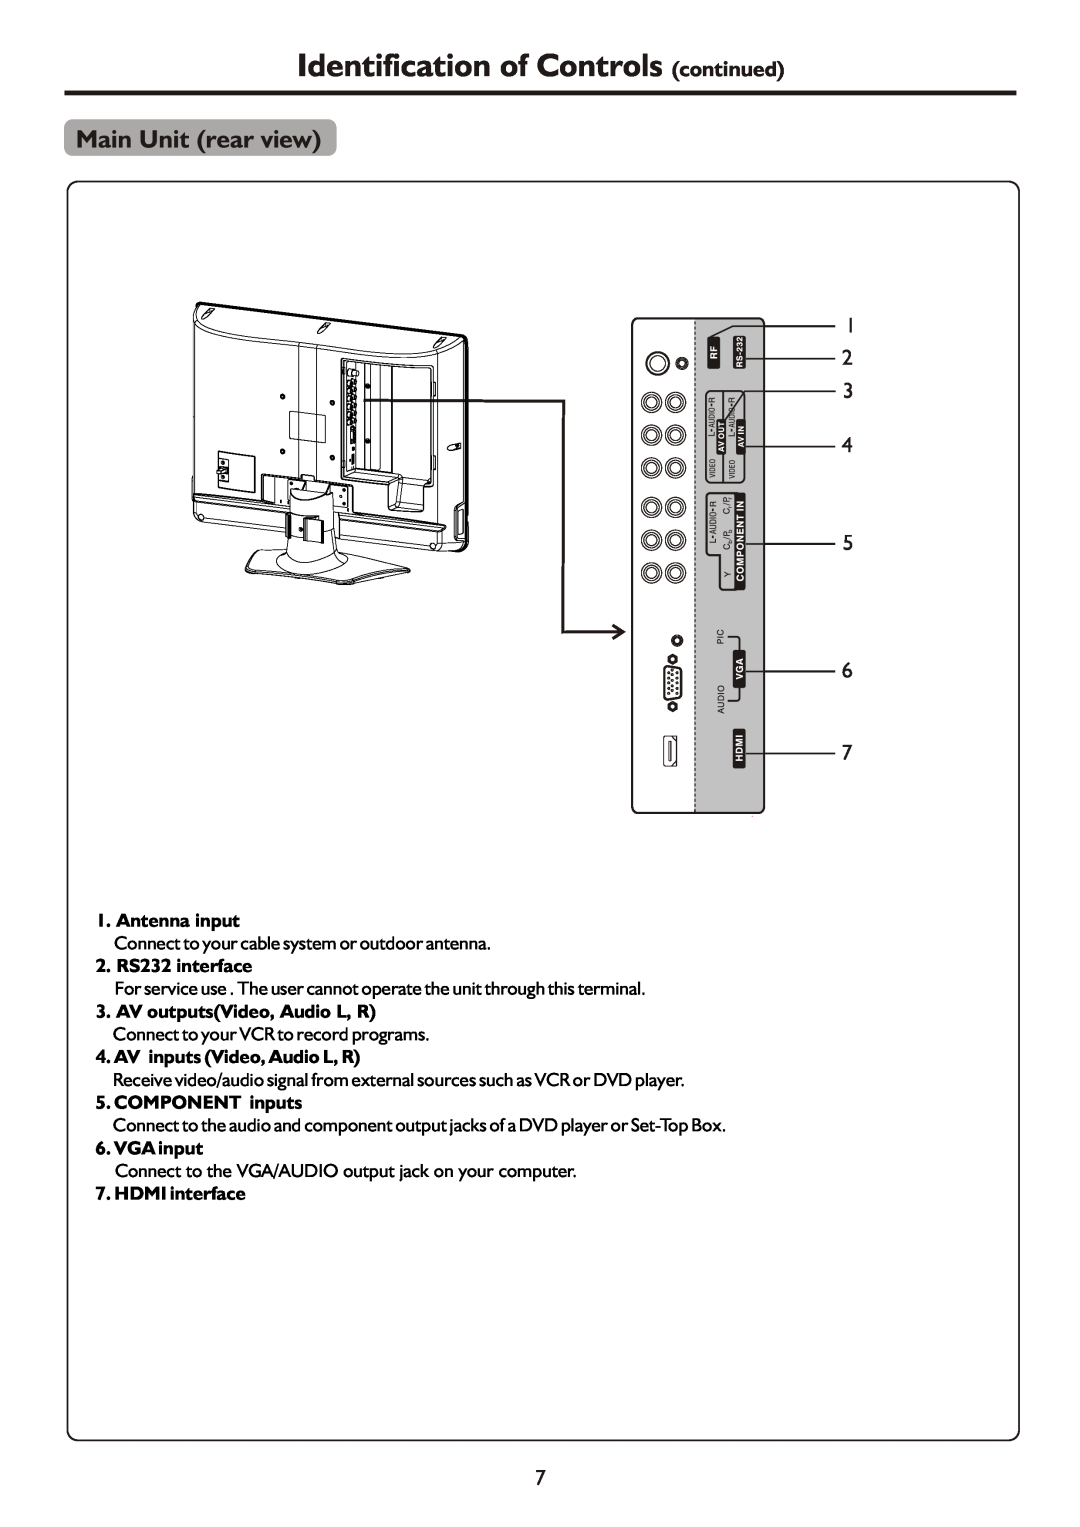 Palsonic TFTV490PWHD manual Identification of Controls continued, Main Unit rear view, Antenna input, 2. RS232 interface 